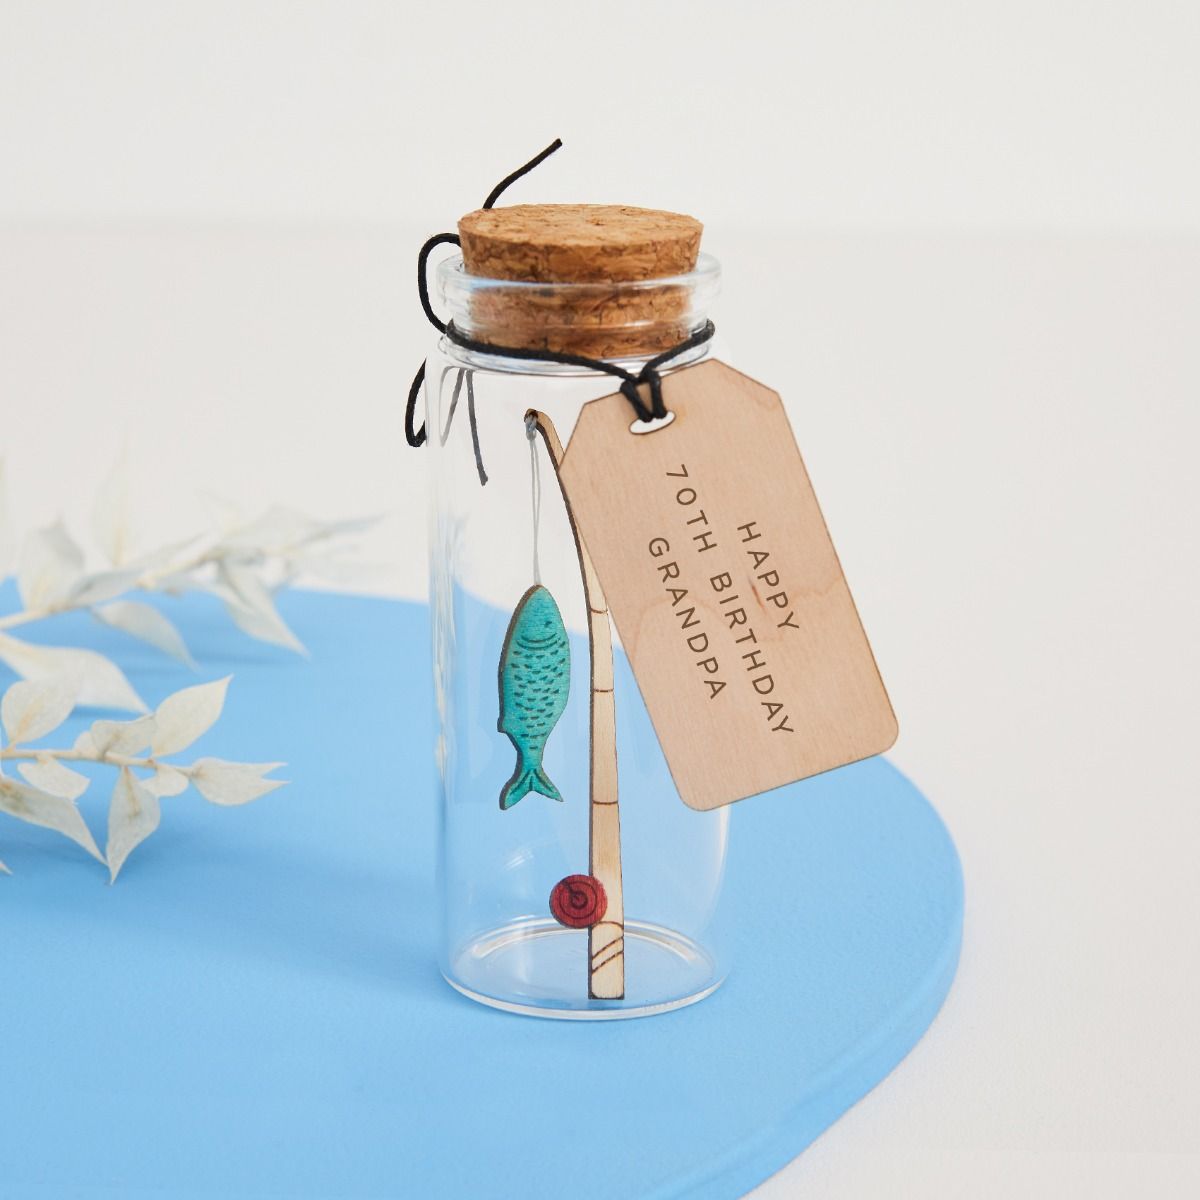 Fishing keepsake gift  Message bottle Father's day gift